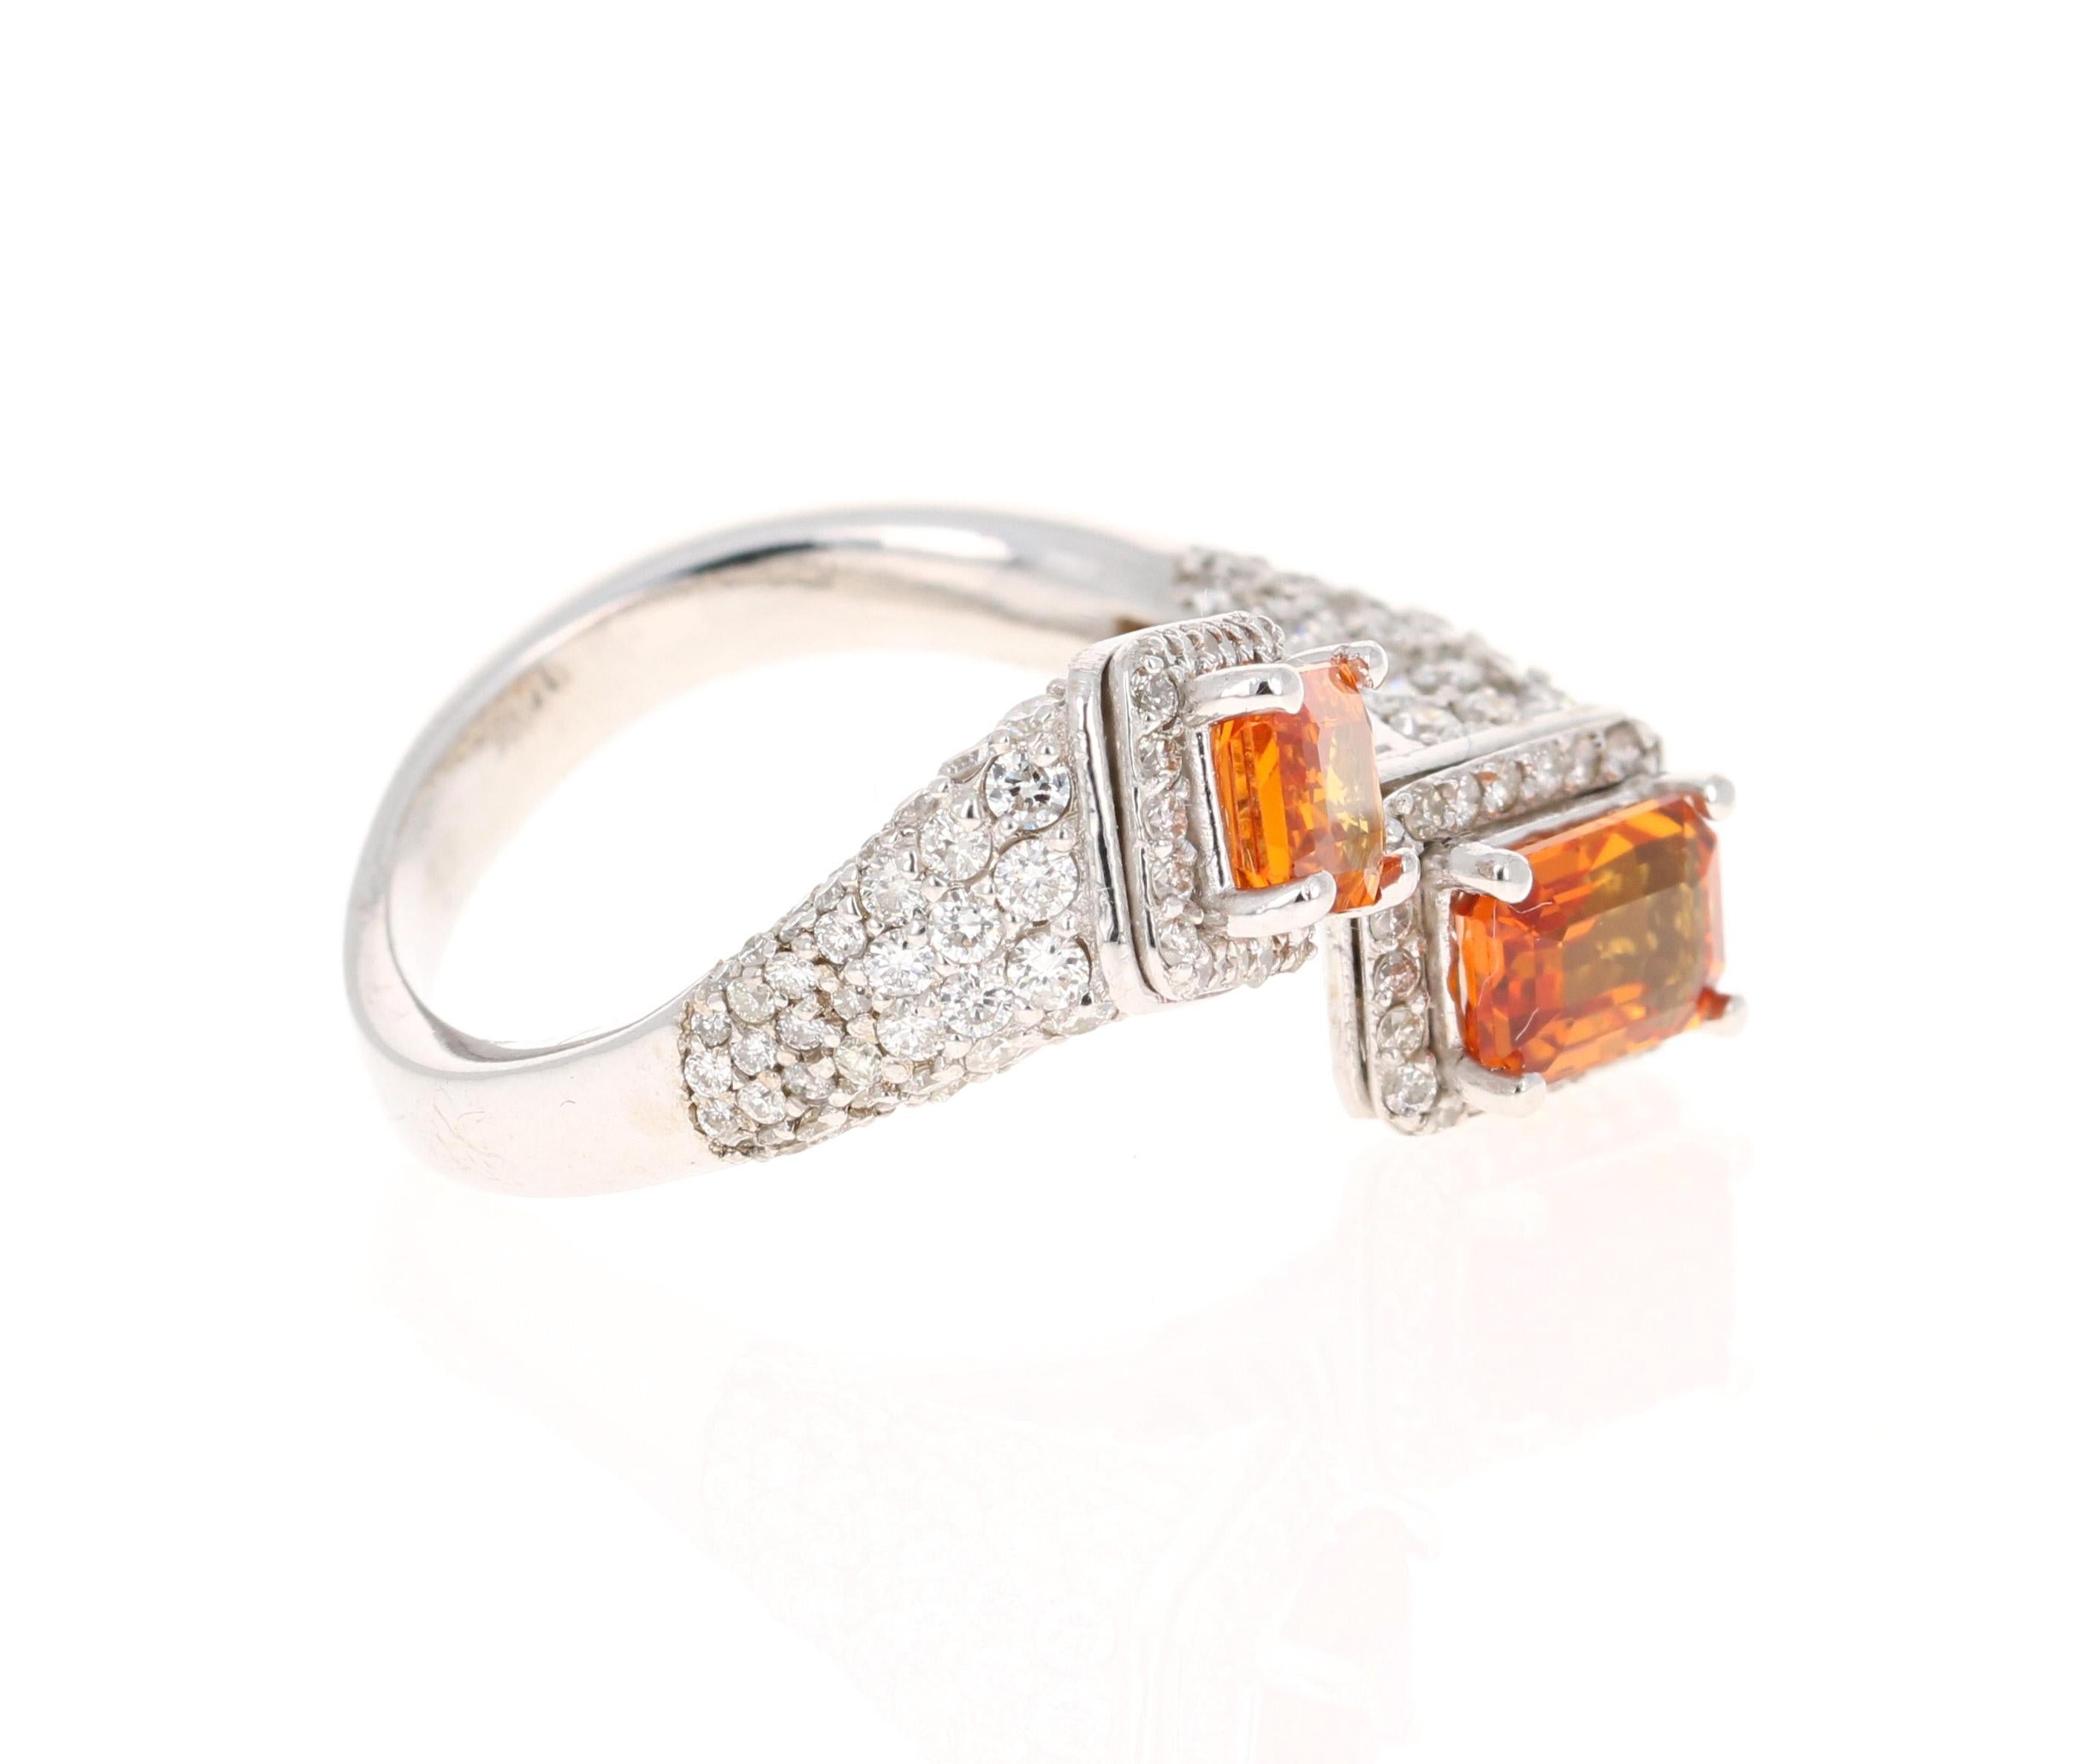 A Unique Orange Sapphire Ring for your collection!

This beautiful ring has 2 Natural Emerald Cut Orange Sapphries that weigh 2.31 carats as well as 169 Round Cut Diamonds that weigh 1.37 carats Carats. The total carat weight of the ring is 3.68